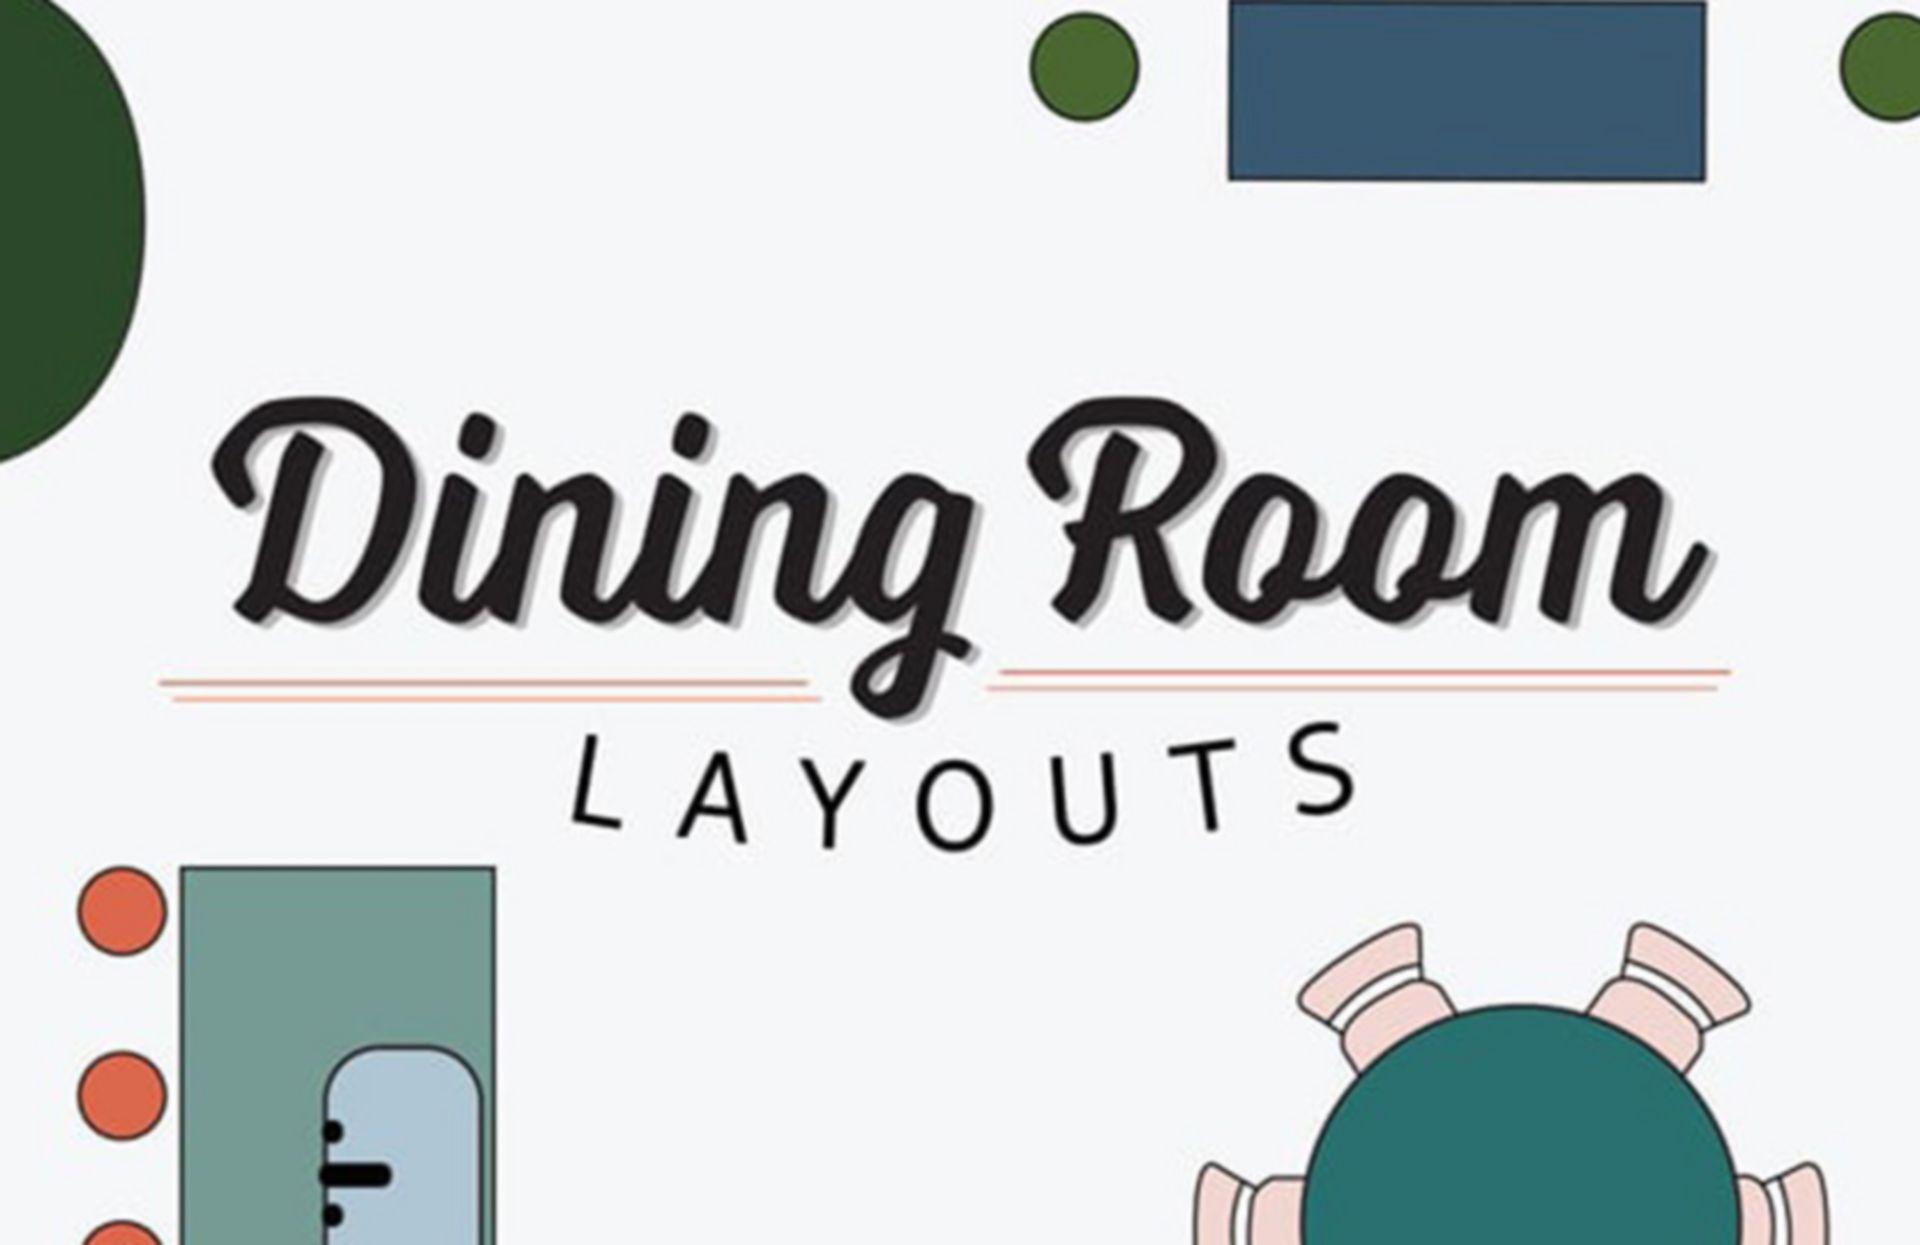 Dining Room Layout Icon